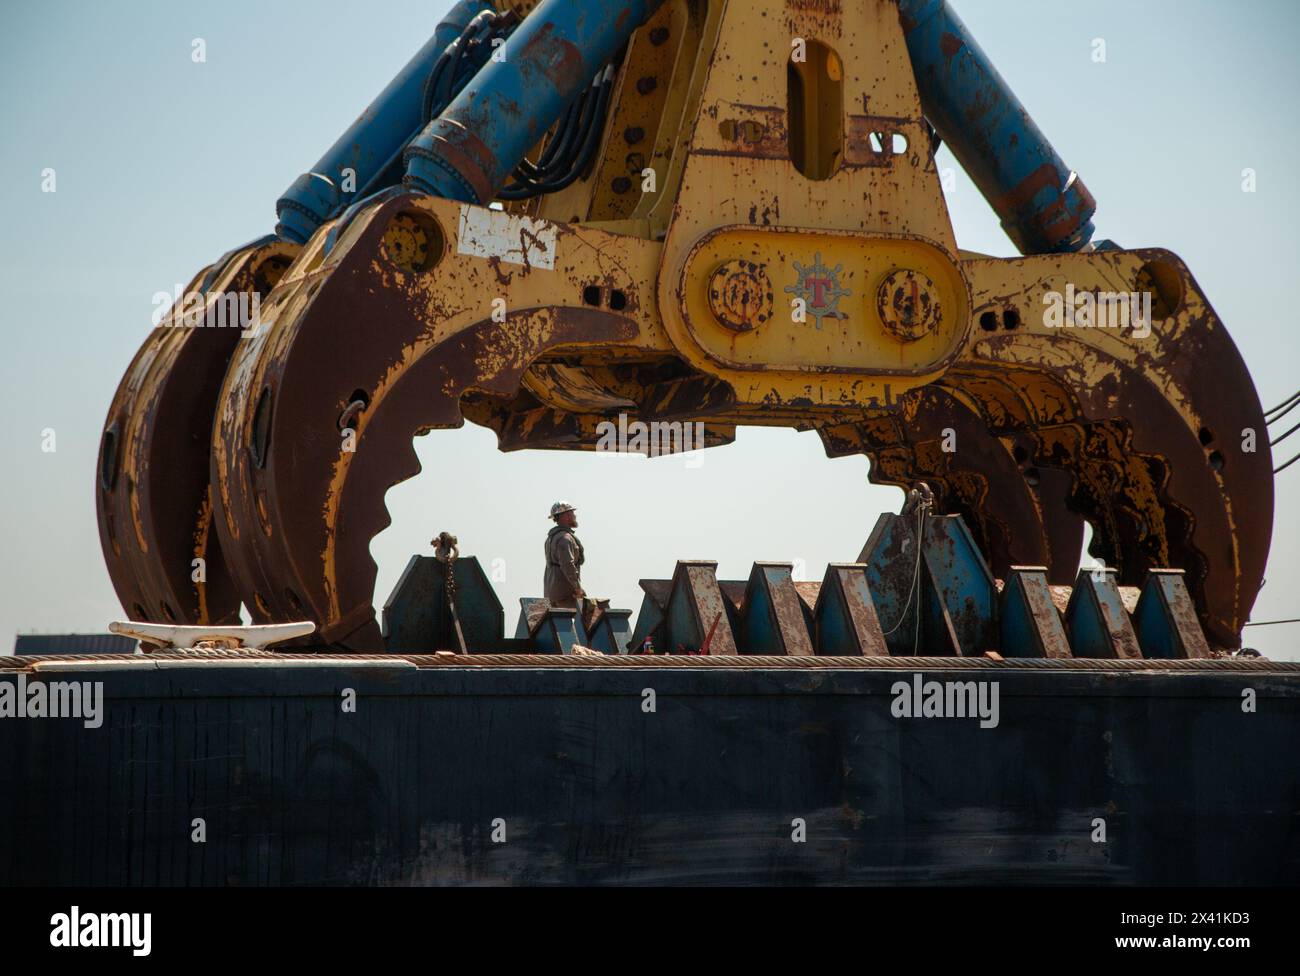 Dundalk, United States Of America. 28th Apr, 2024. Dundalk, United States of America. 28 April, 2024. Salvage crews prepare the HSWC500-1000 heavy duty hydraulic salvage grab claw attached to the massive Chesapeake 1000 heavy lift sheerleg crane ship as work continues to clear the wreckage of the collapsed Francis Scott Key Bridge, April 28, 2024, near Dundalk, Maryland. The bridge was struck by the 984-foot container ship MV Dali on March 26th and collapsed killing six workers. Credit: Dylan Burnell/U.S Army Corps of Engineers/Alamy Live News Stock Photo